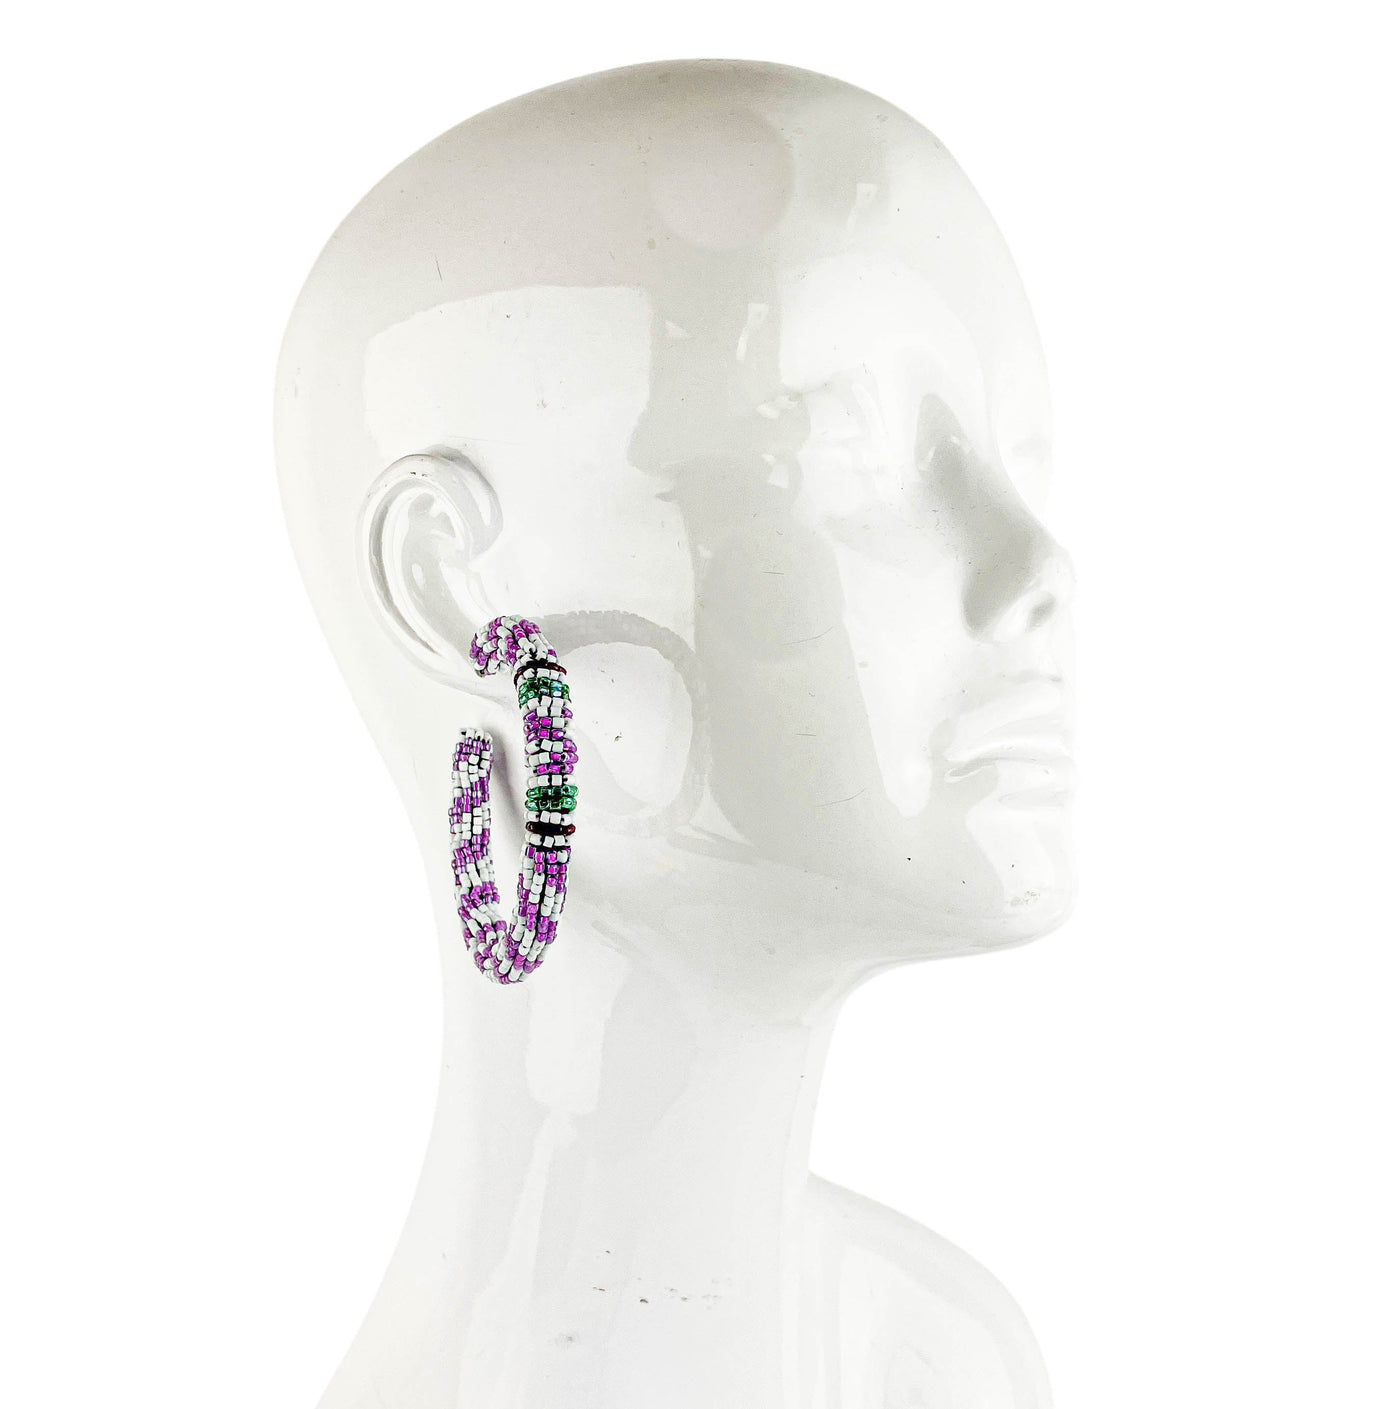 Isabel Marant Beaded Hoop Earrings in Lilac - Discounts on Isabel Marant at UAL